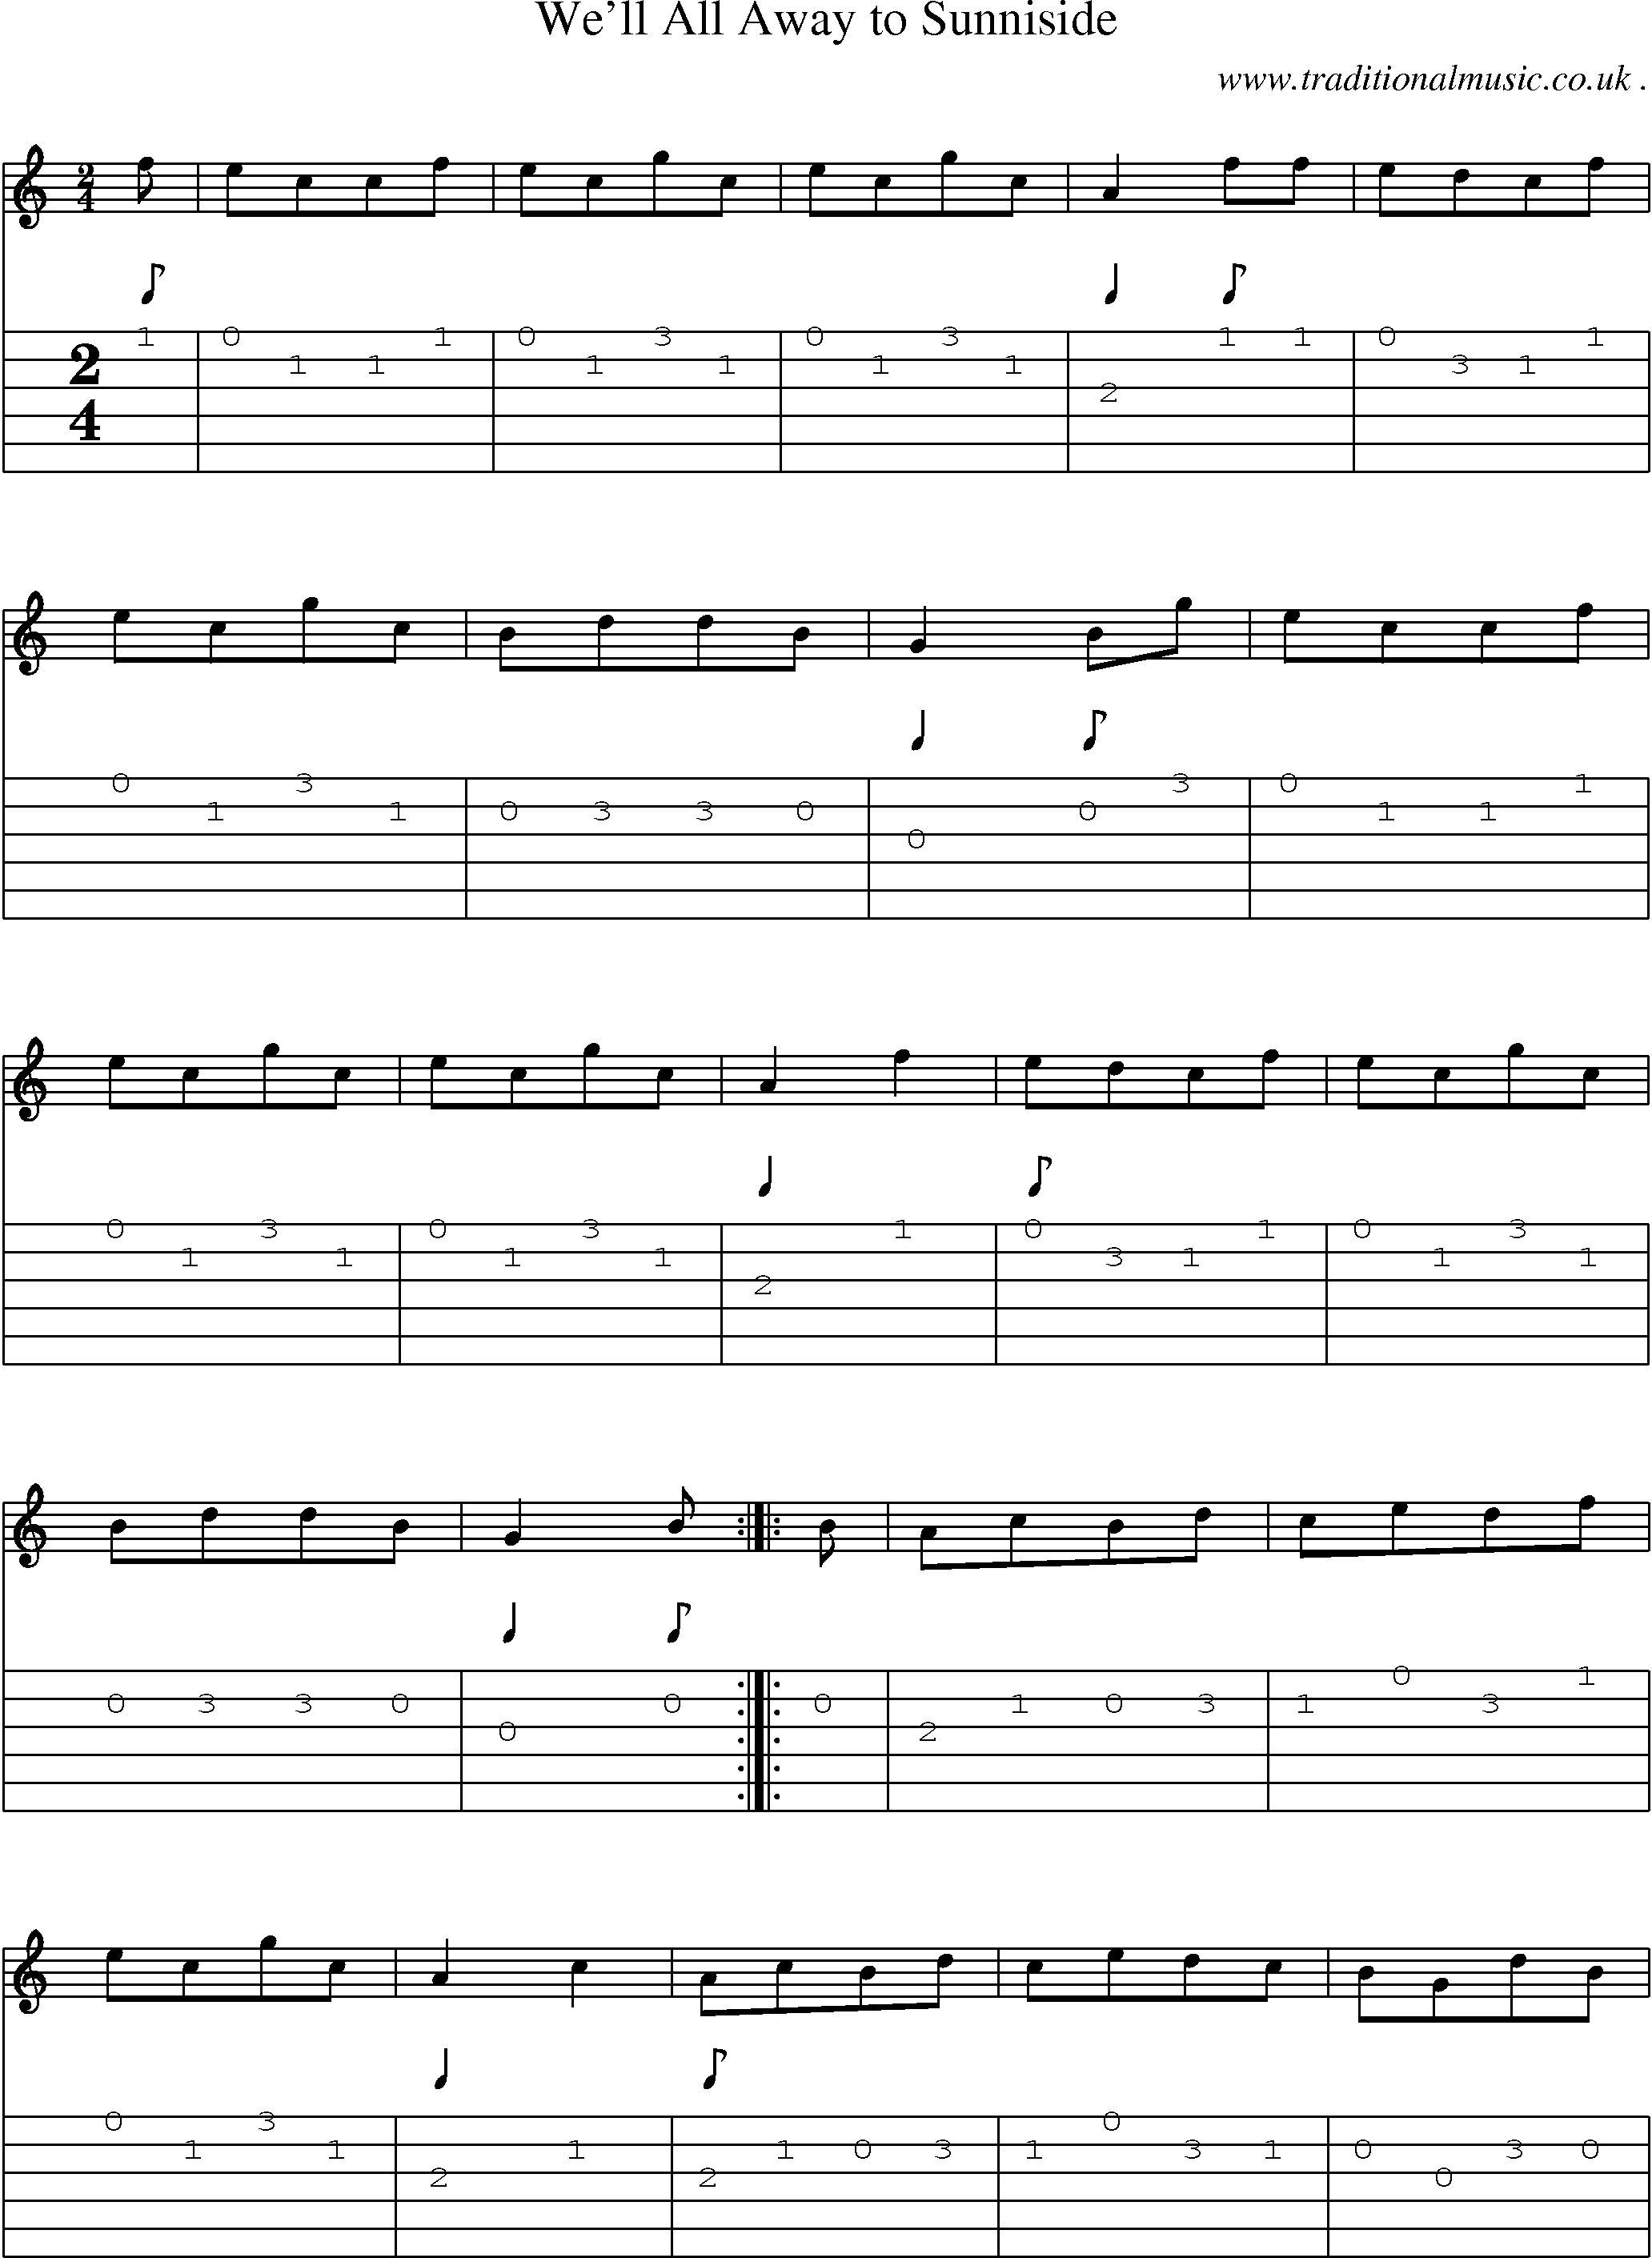 Sheet-Music and Guitar Tabs for Well All Away To Sunniside